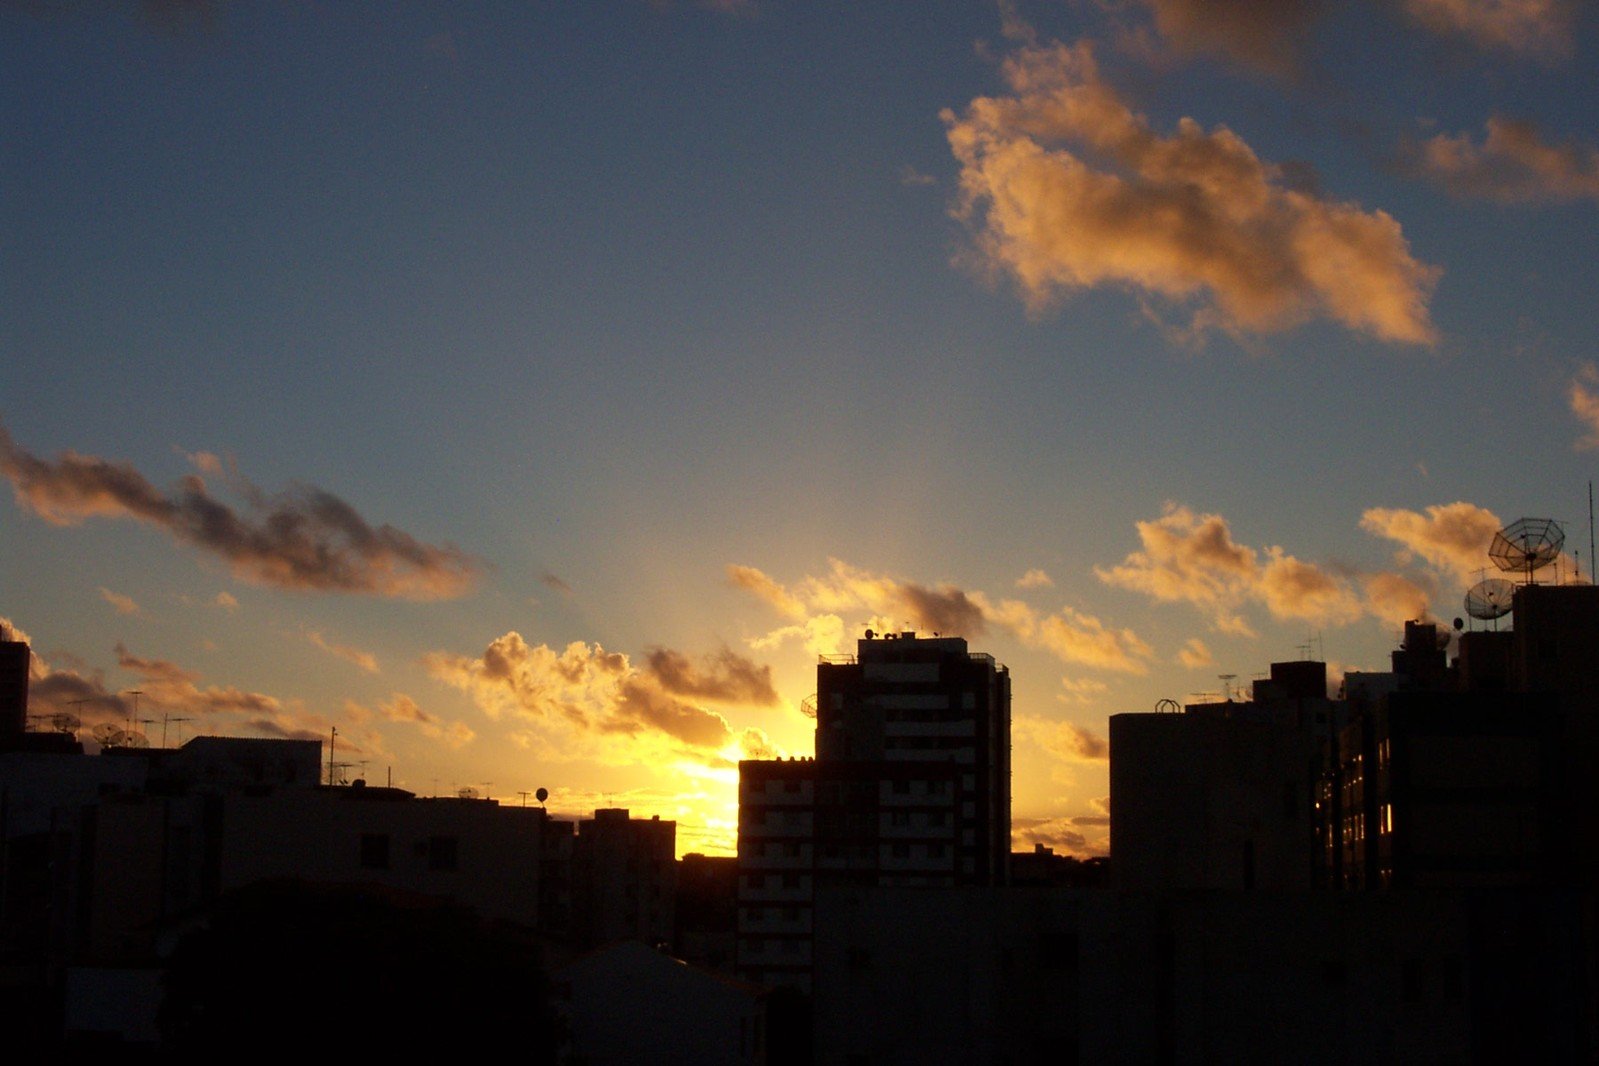 a view of the sunset with building silhouettes